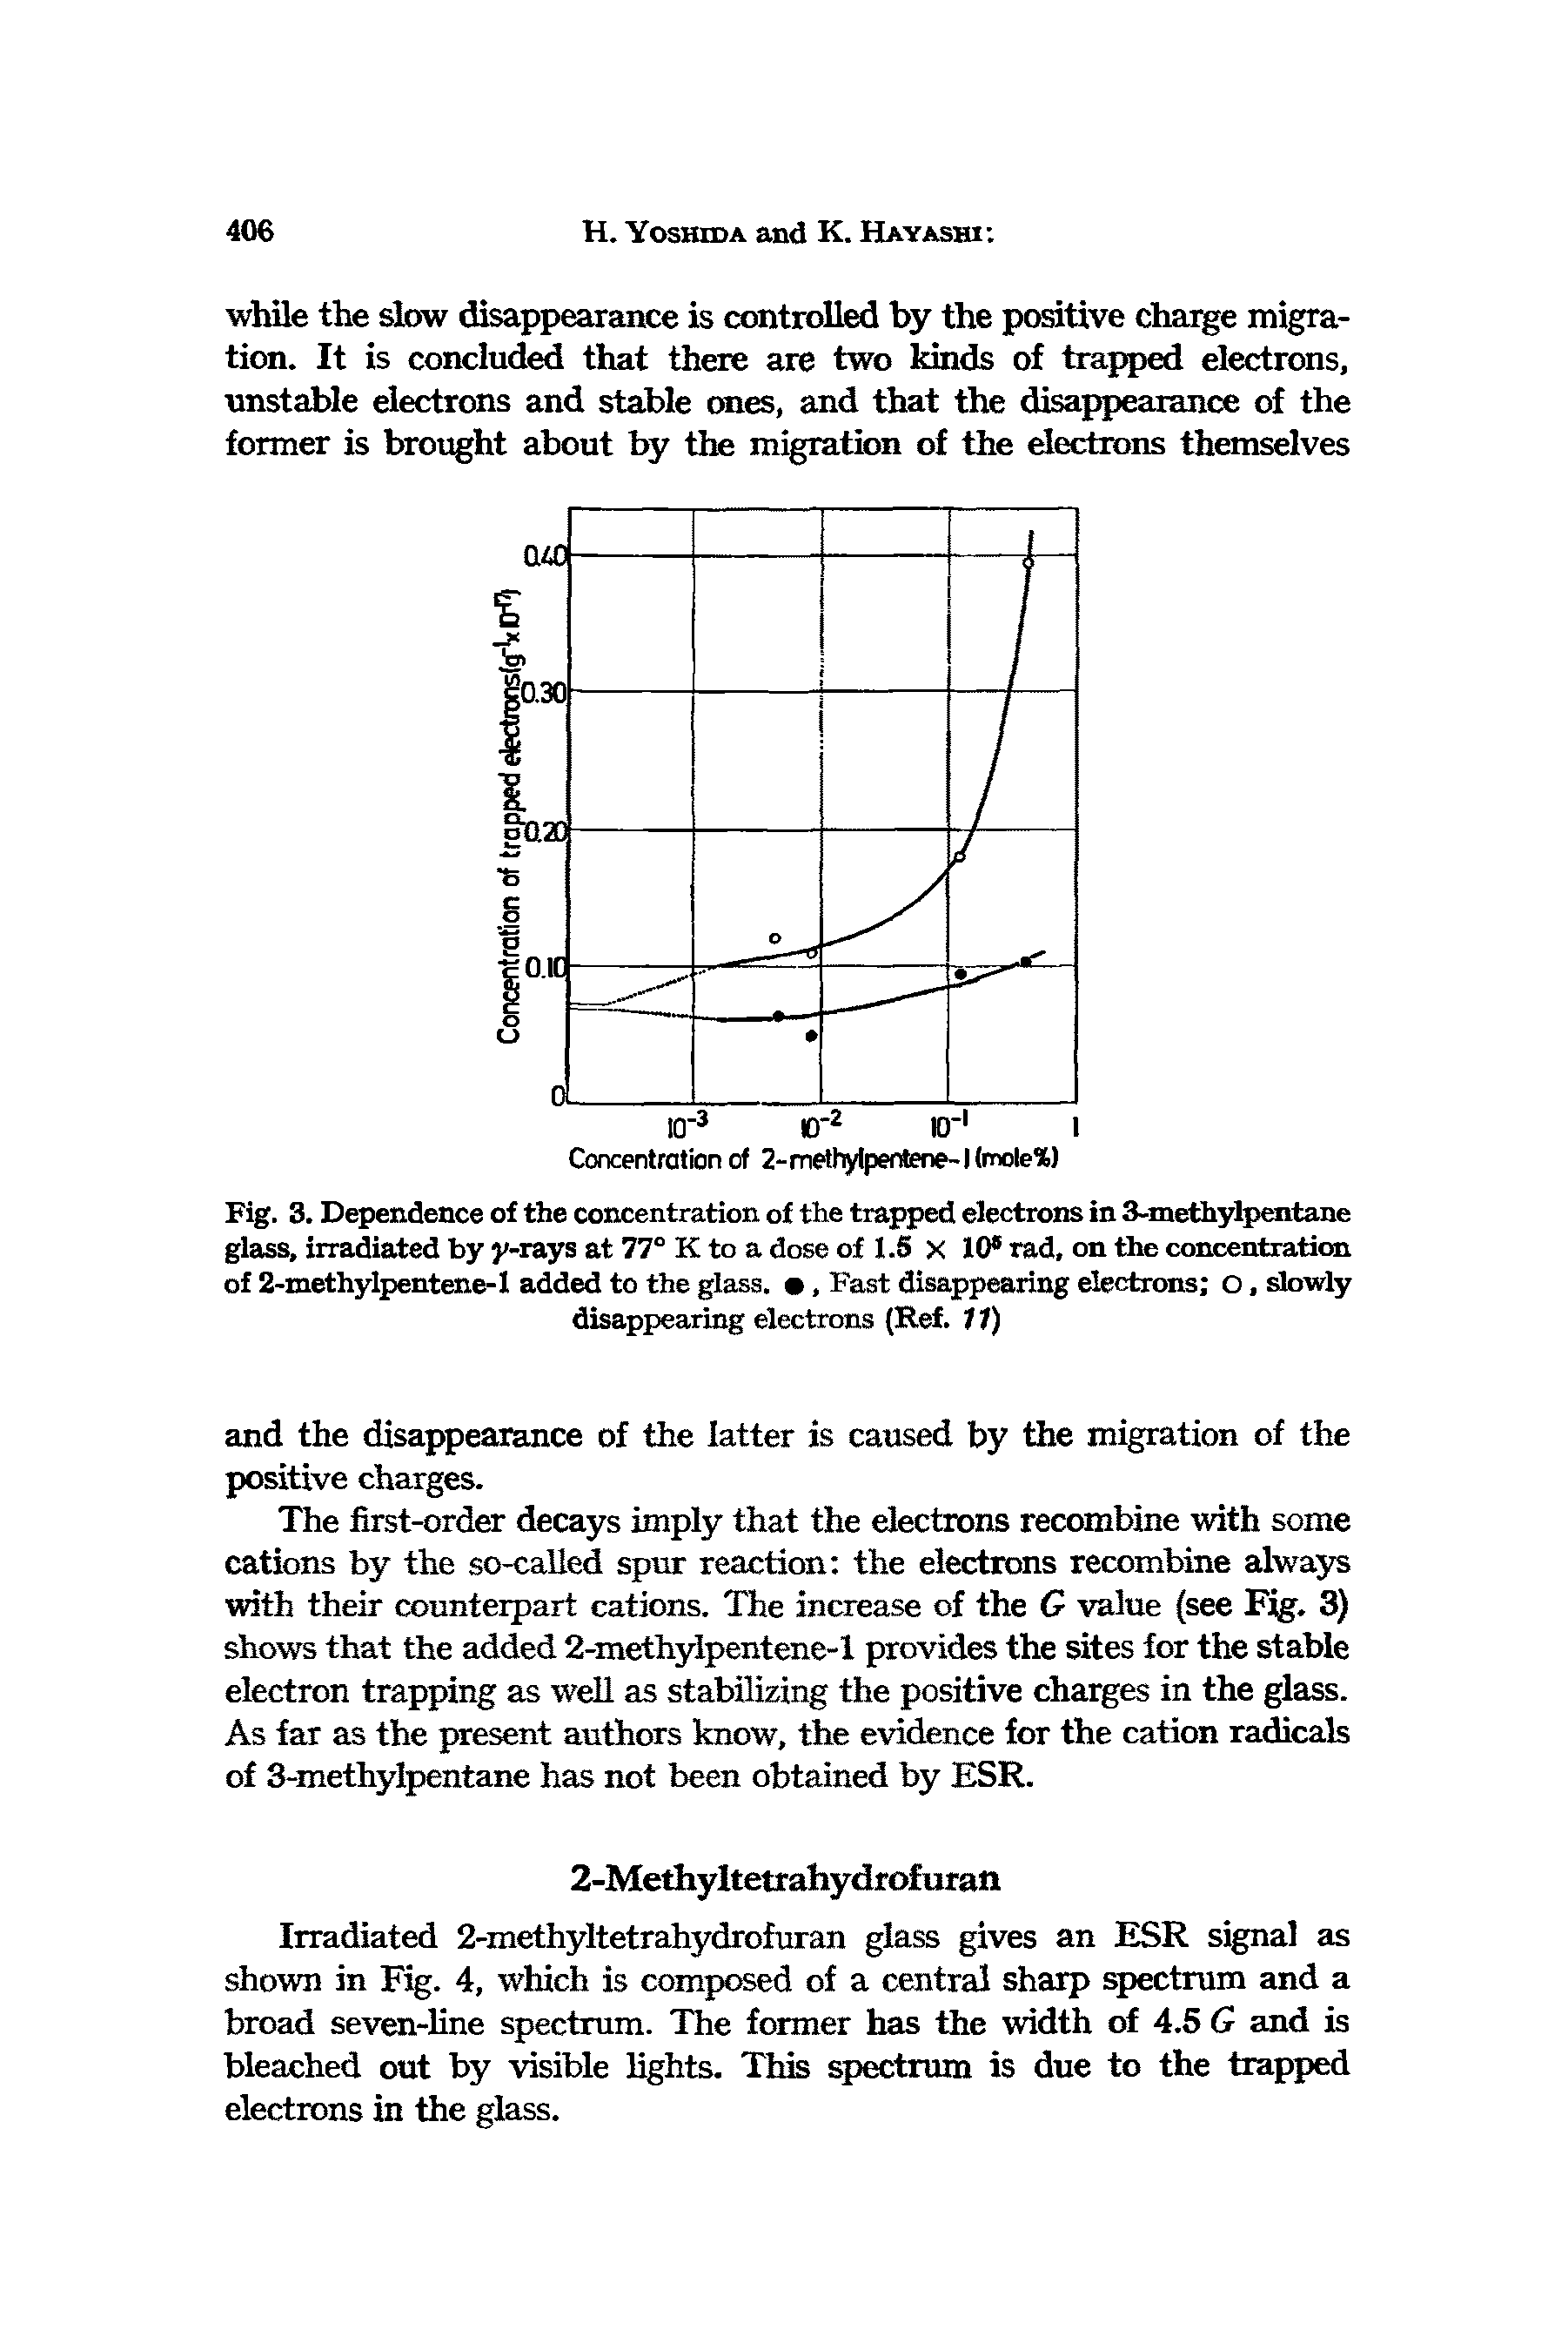 Fig. 3. Dependence of the concentration of the trapped electrons in 3-methylpentane glass, irradiated by y-rays at 77° K to a dose of 1.5 x 10 rad, on the concentration of 2-methylpentene-l added to the glass. , Fast disappearing electrons o, slowly disappearing electrons (Ref. 11)...